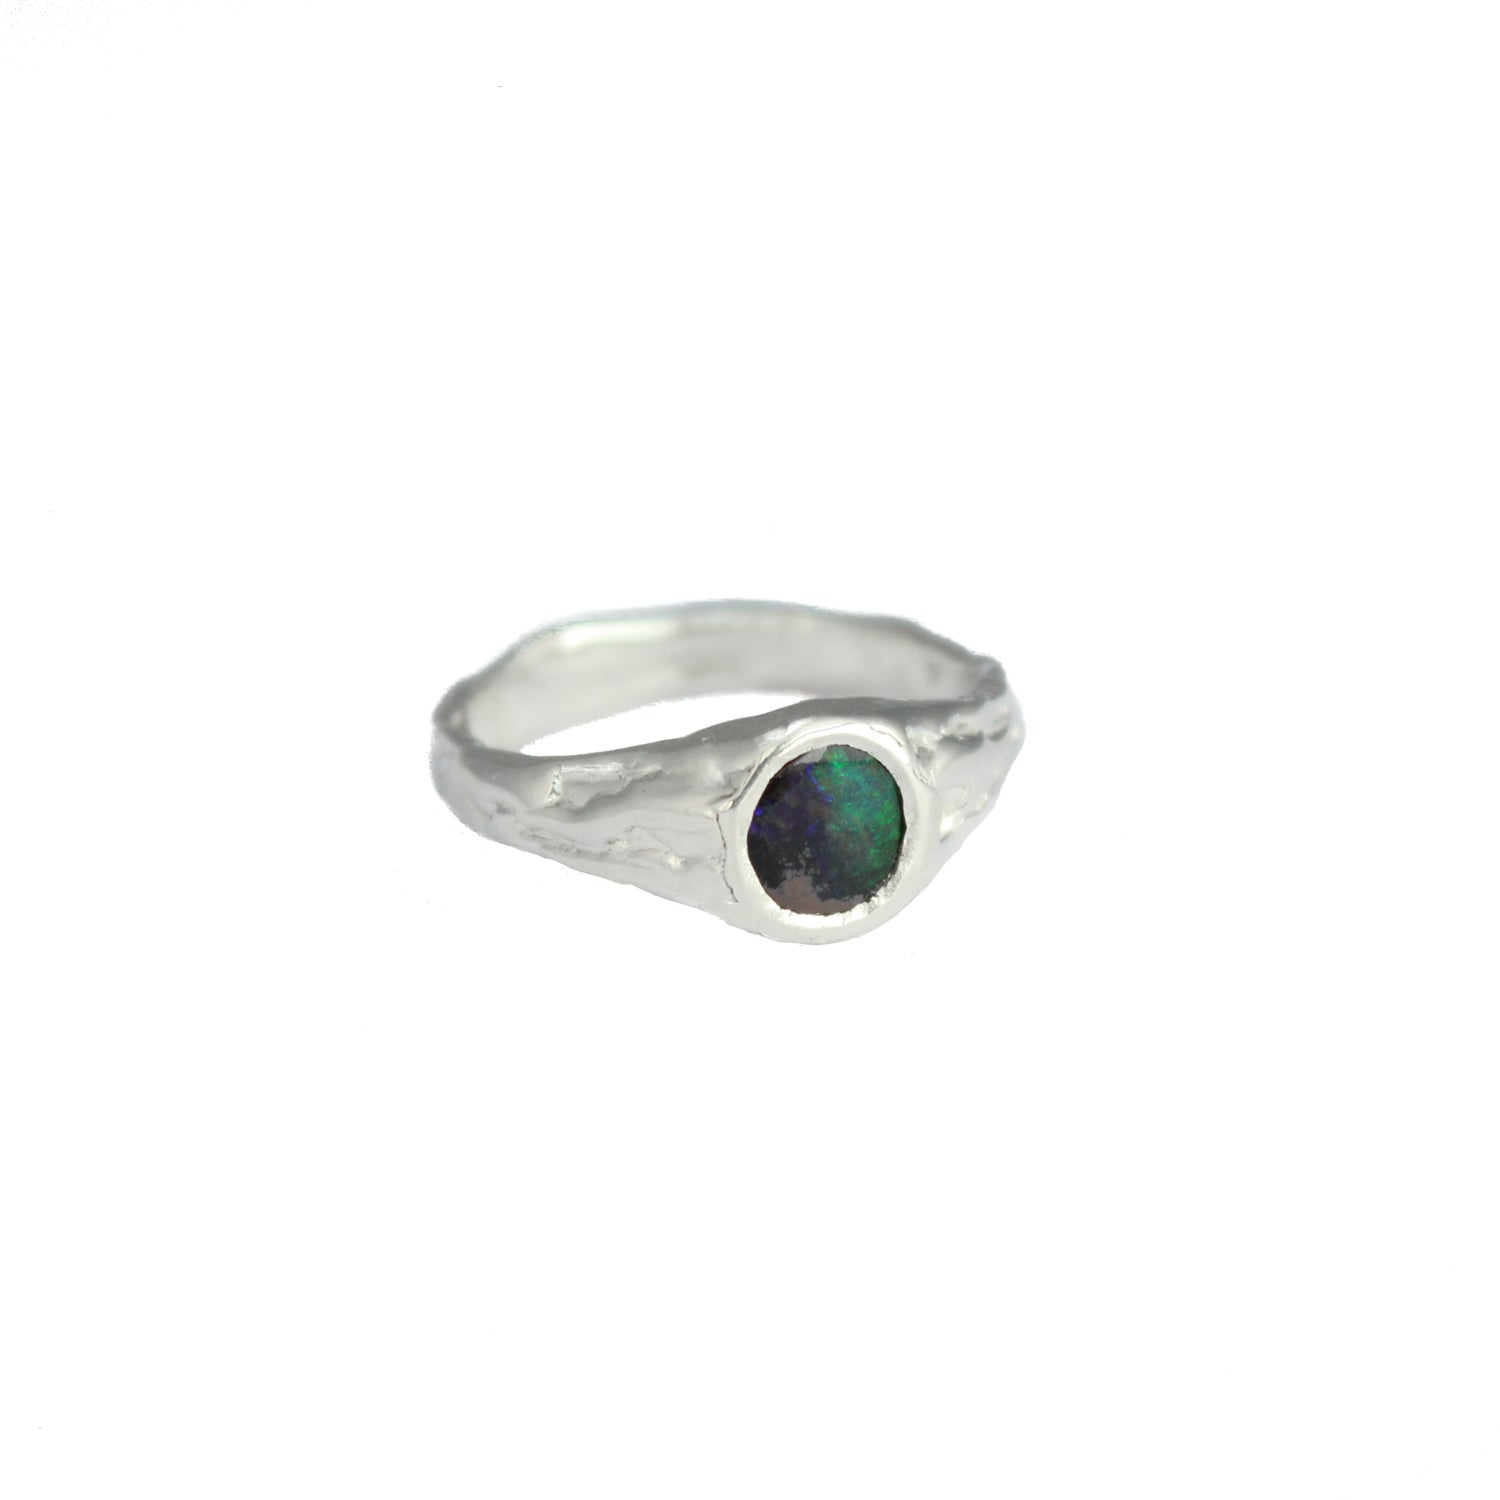 Mini Opal Crater Ring - Size 5.5 - Thaleia